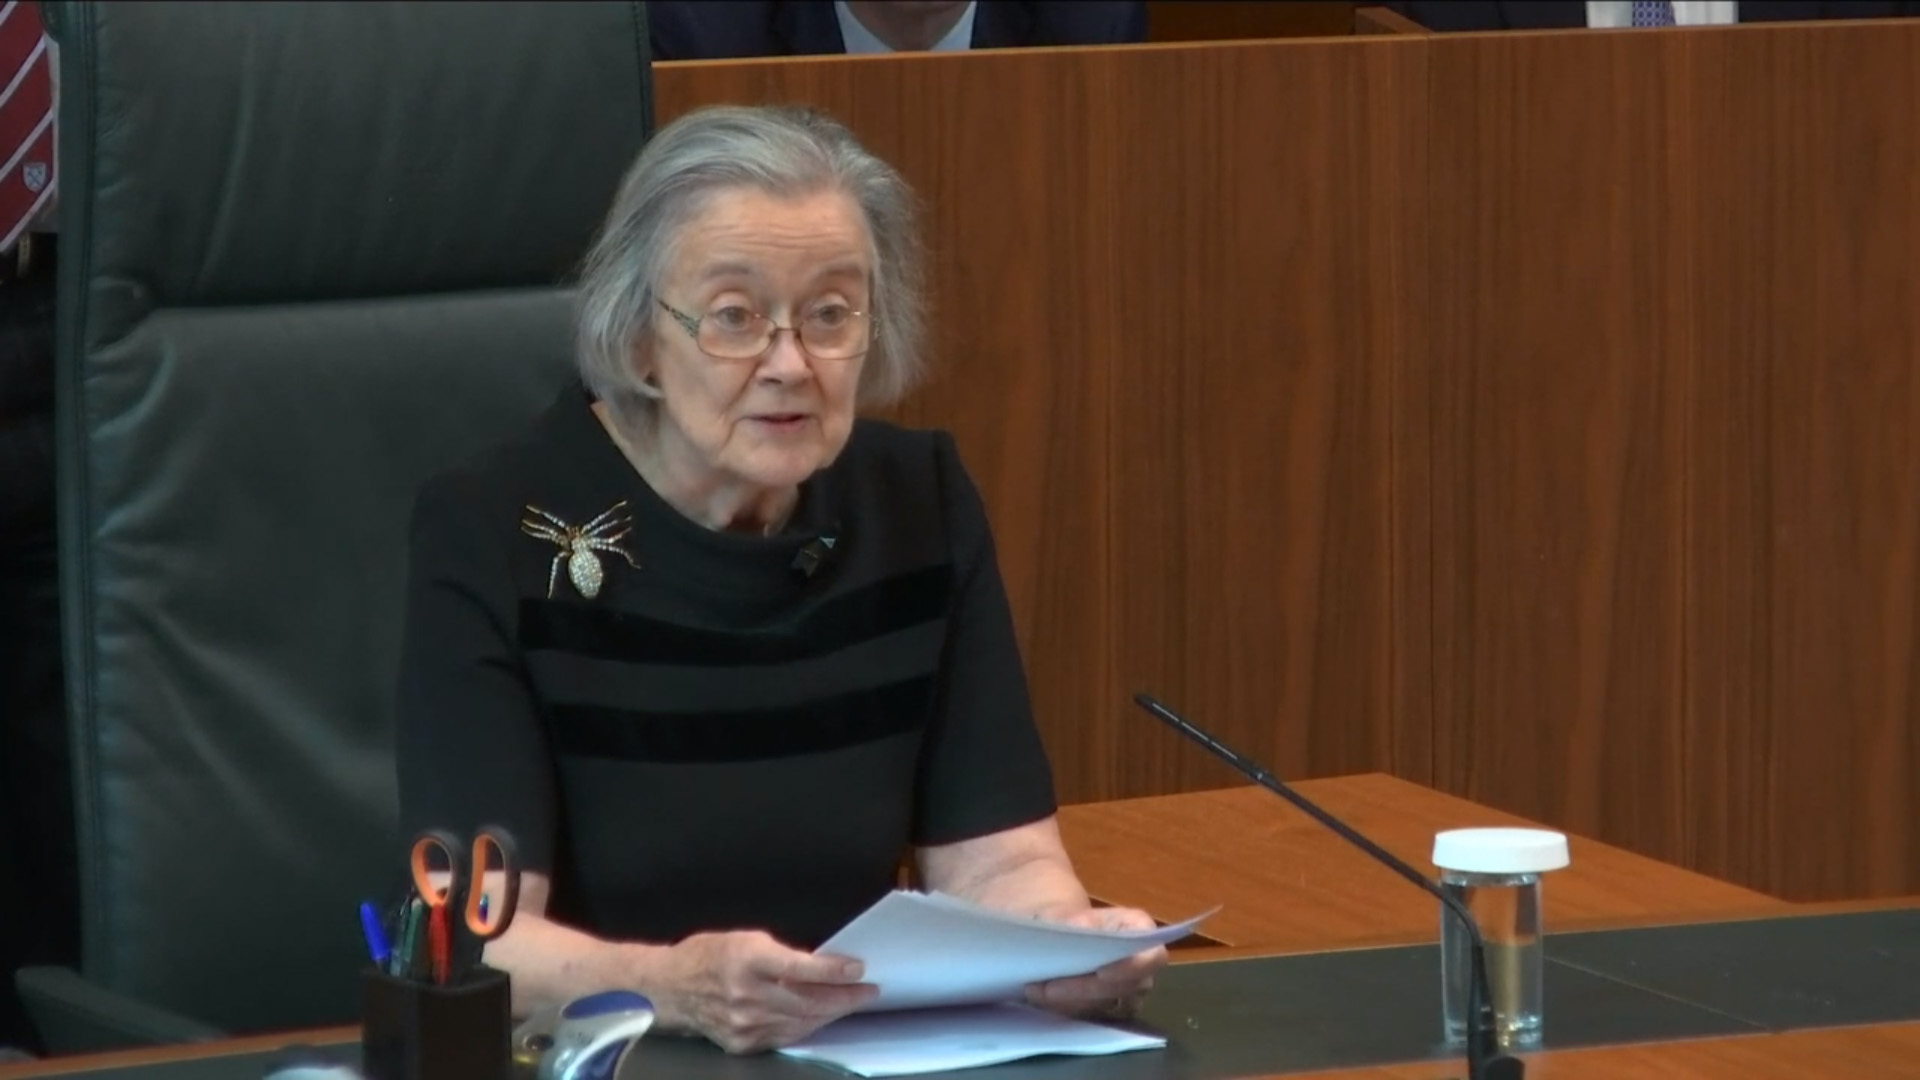 Lady Hale ruling on the Prime Ministers prorogation of Parliament in September 2017